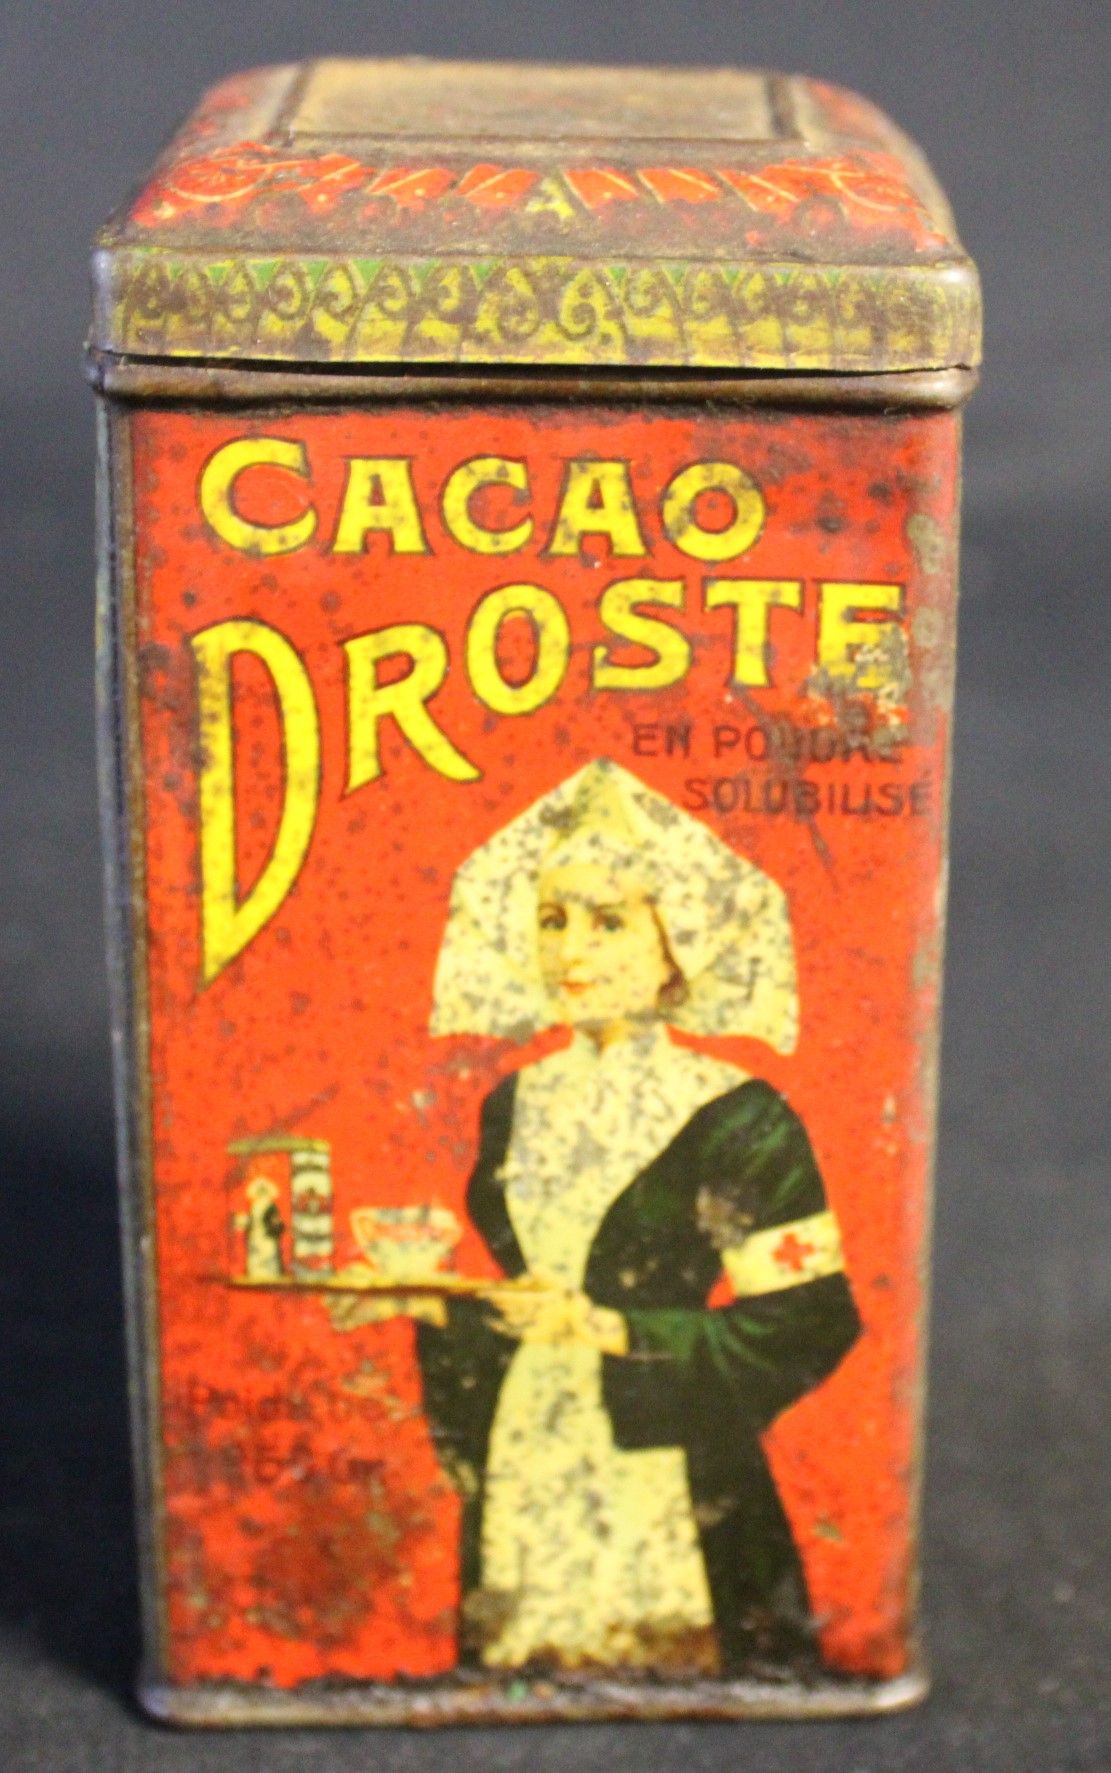 Null Iron box "DROSTE CACAO", wear, 12x6